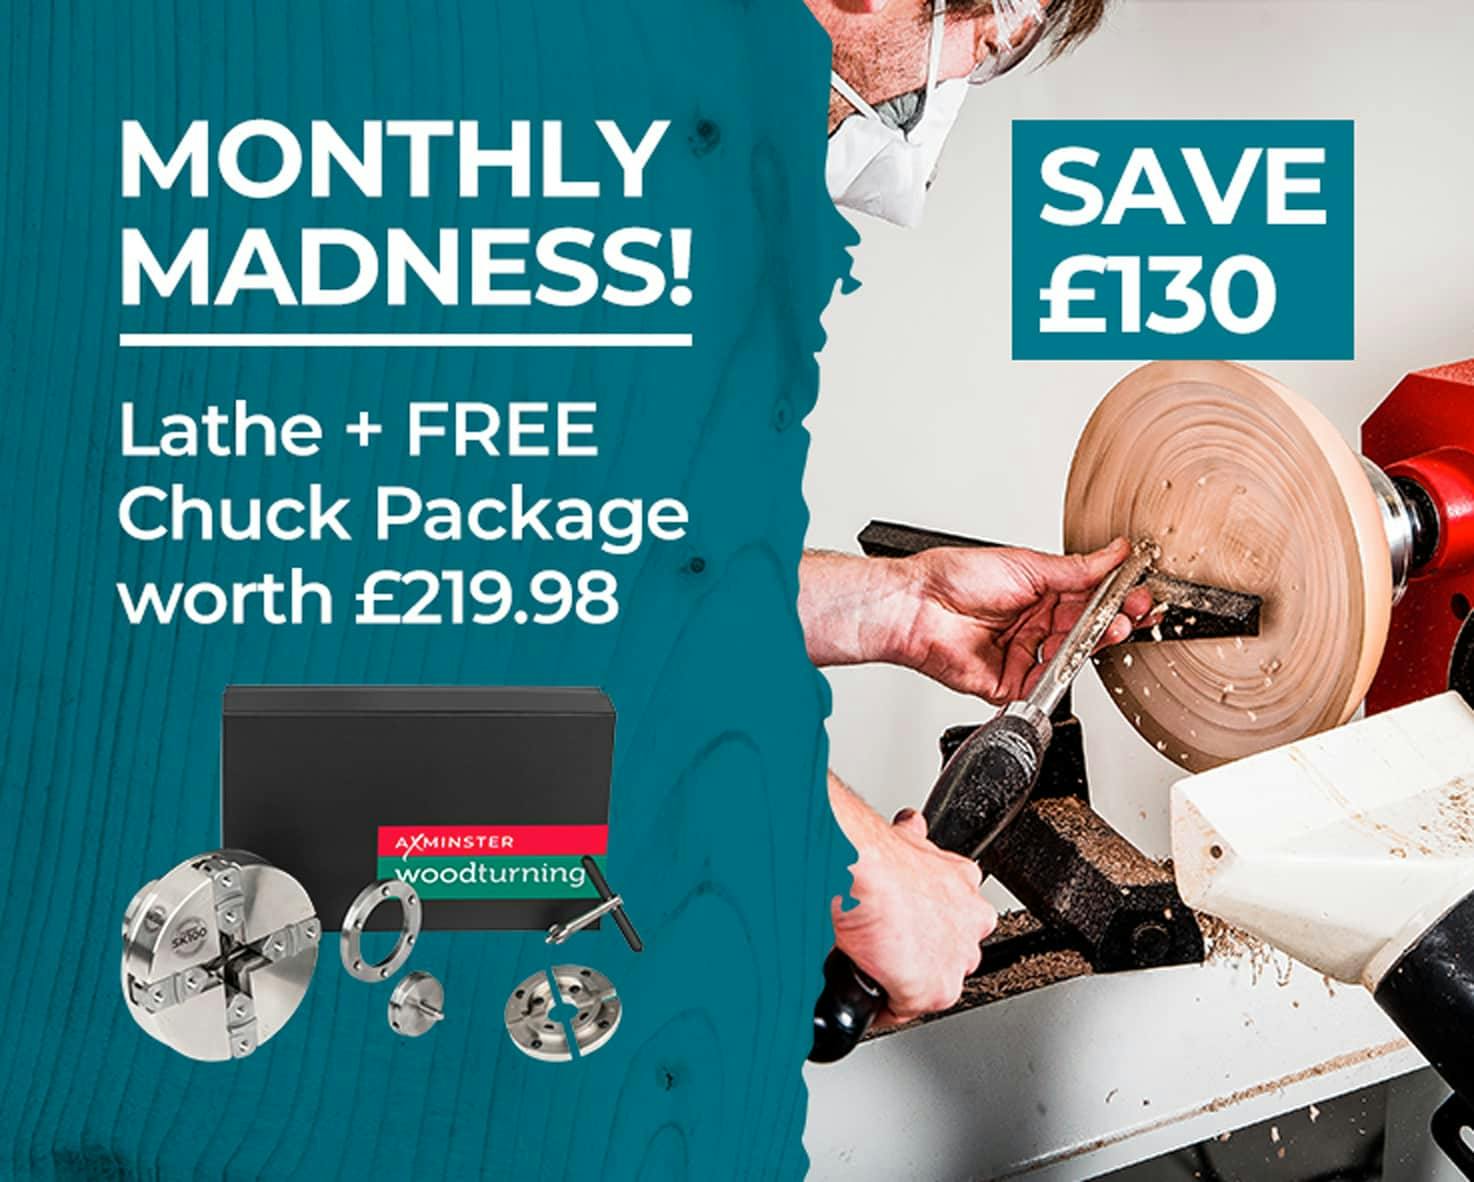 SAVE £130 and FREE Chuck Package worth £219.98